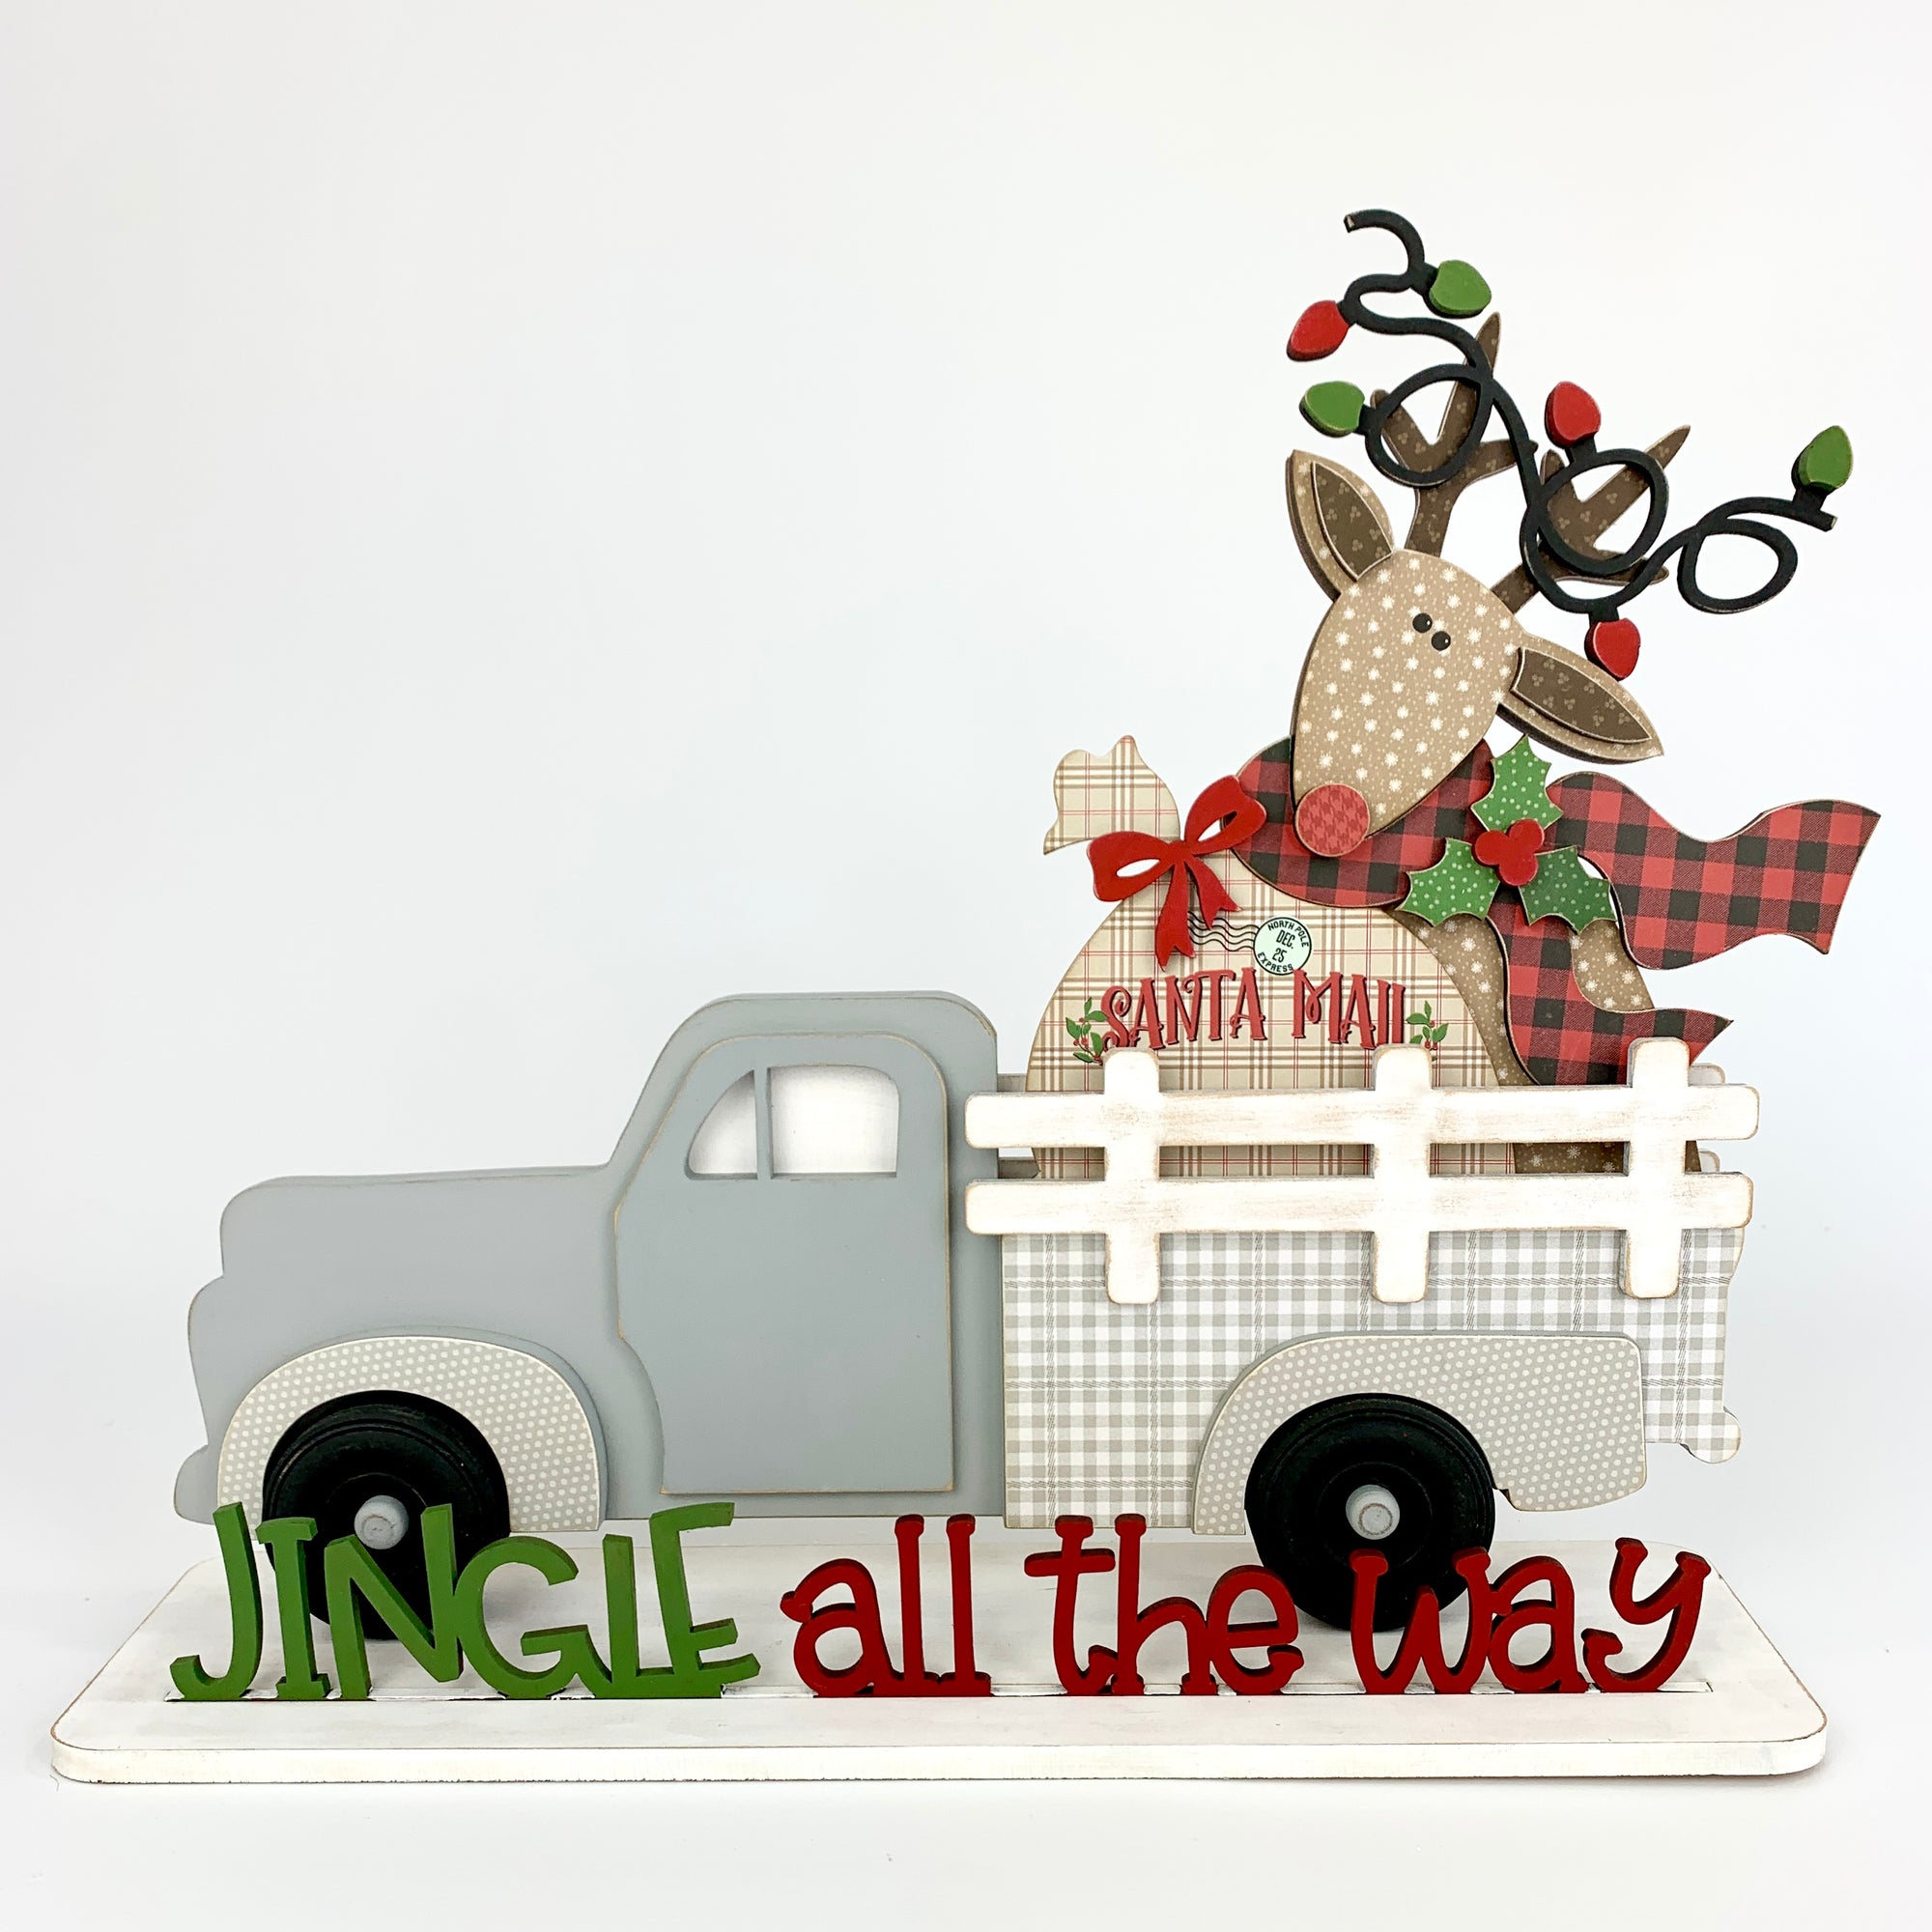 Christmas reindeer interchangeable pick up truck insert. Changing seasonal wood decor Christmas reindeer wood craft kit. Reindeer holding santa mail sack with Christmas lights wrapped around his antlers.